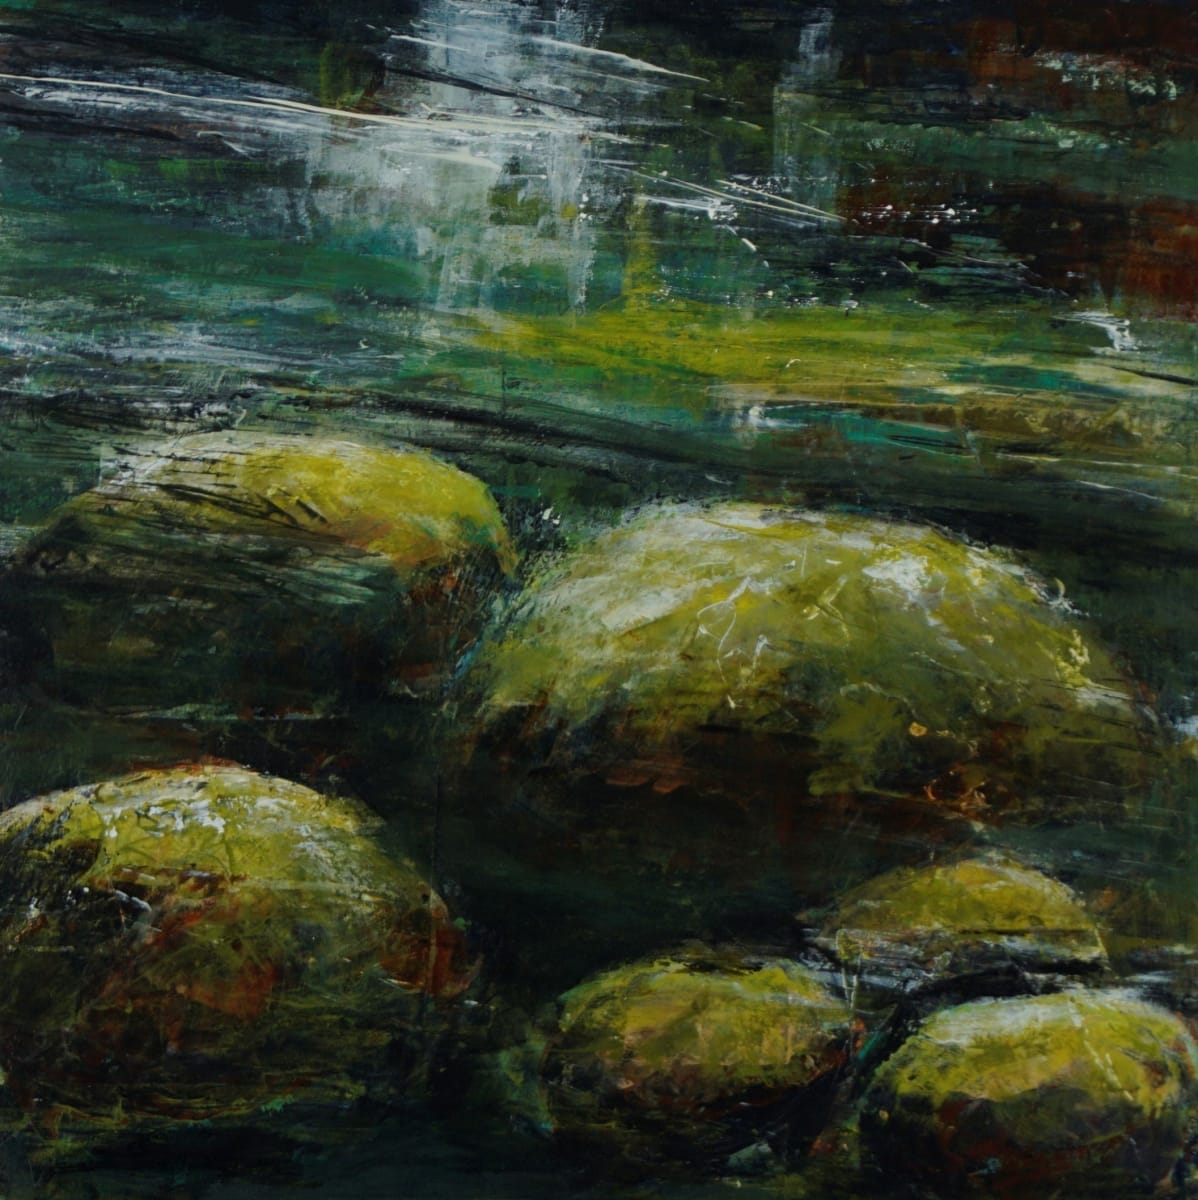 The Light Under by Lisa Scranney Palmer  Image: Memories of a walk amongst native woodland, tumbling water over rocks and reflective pools.